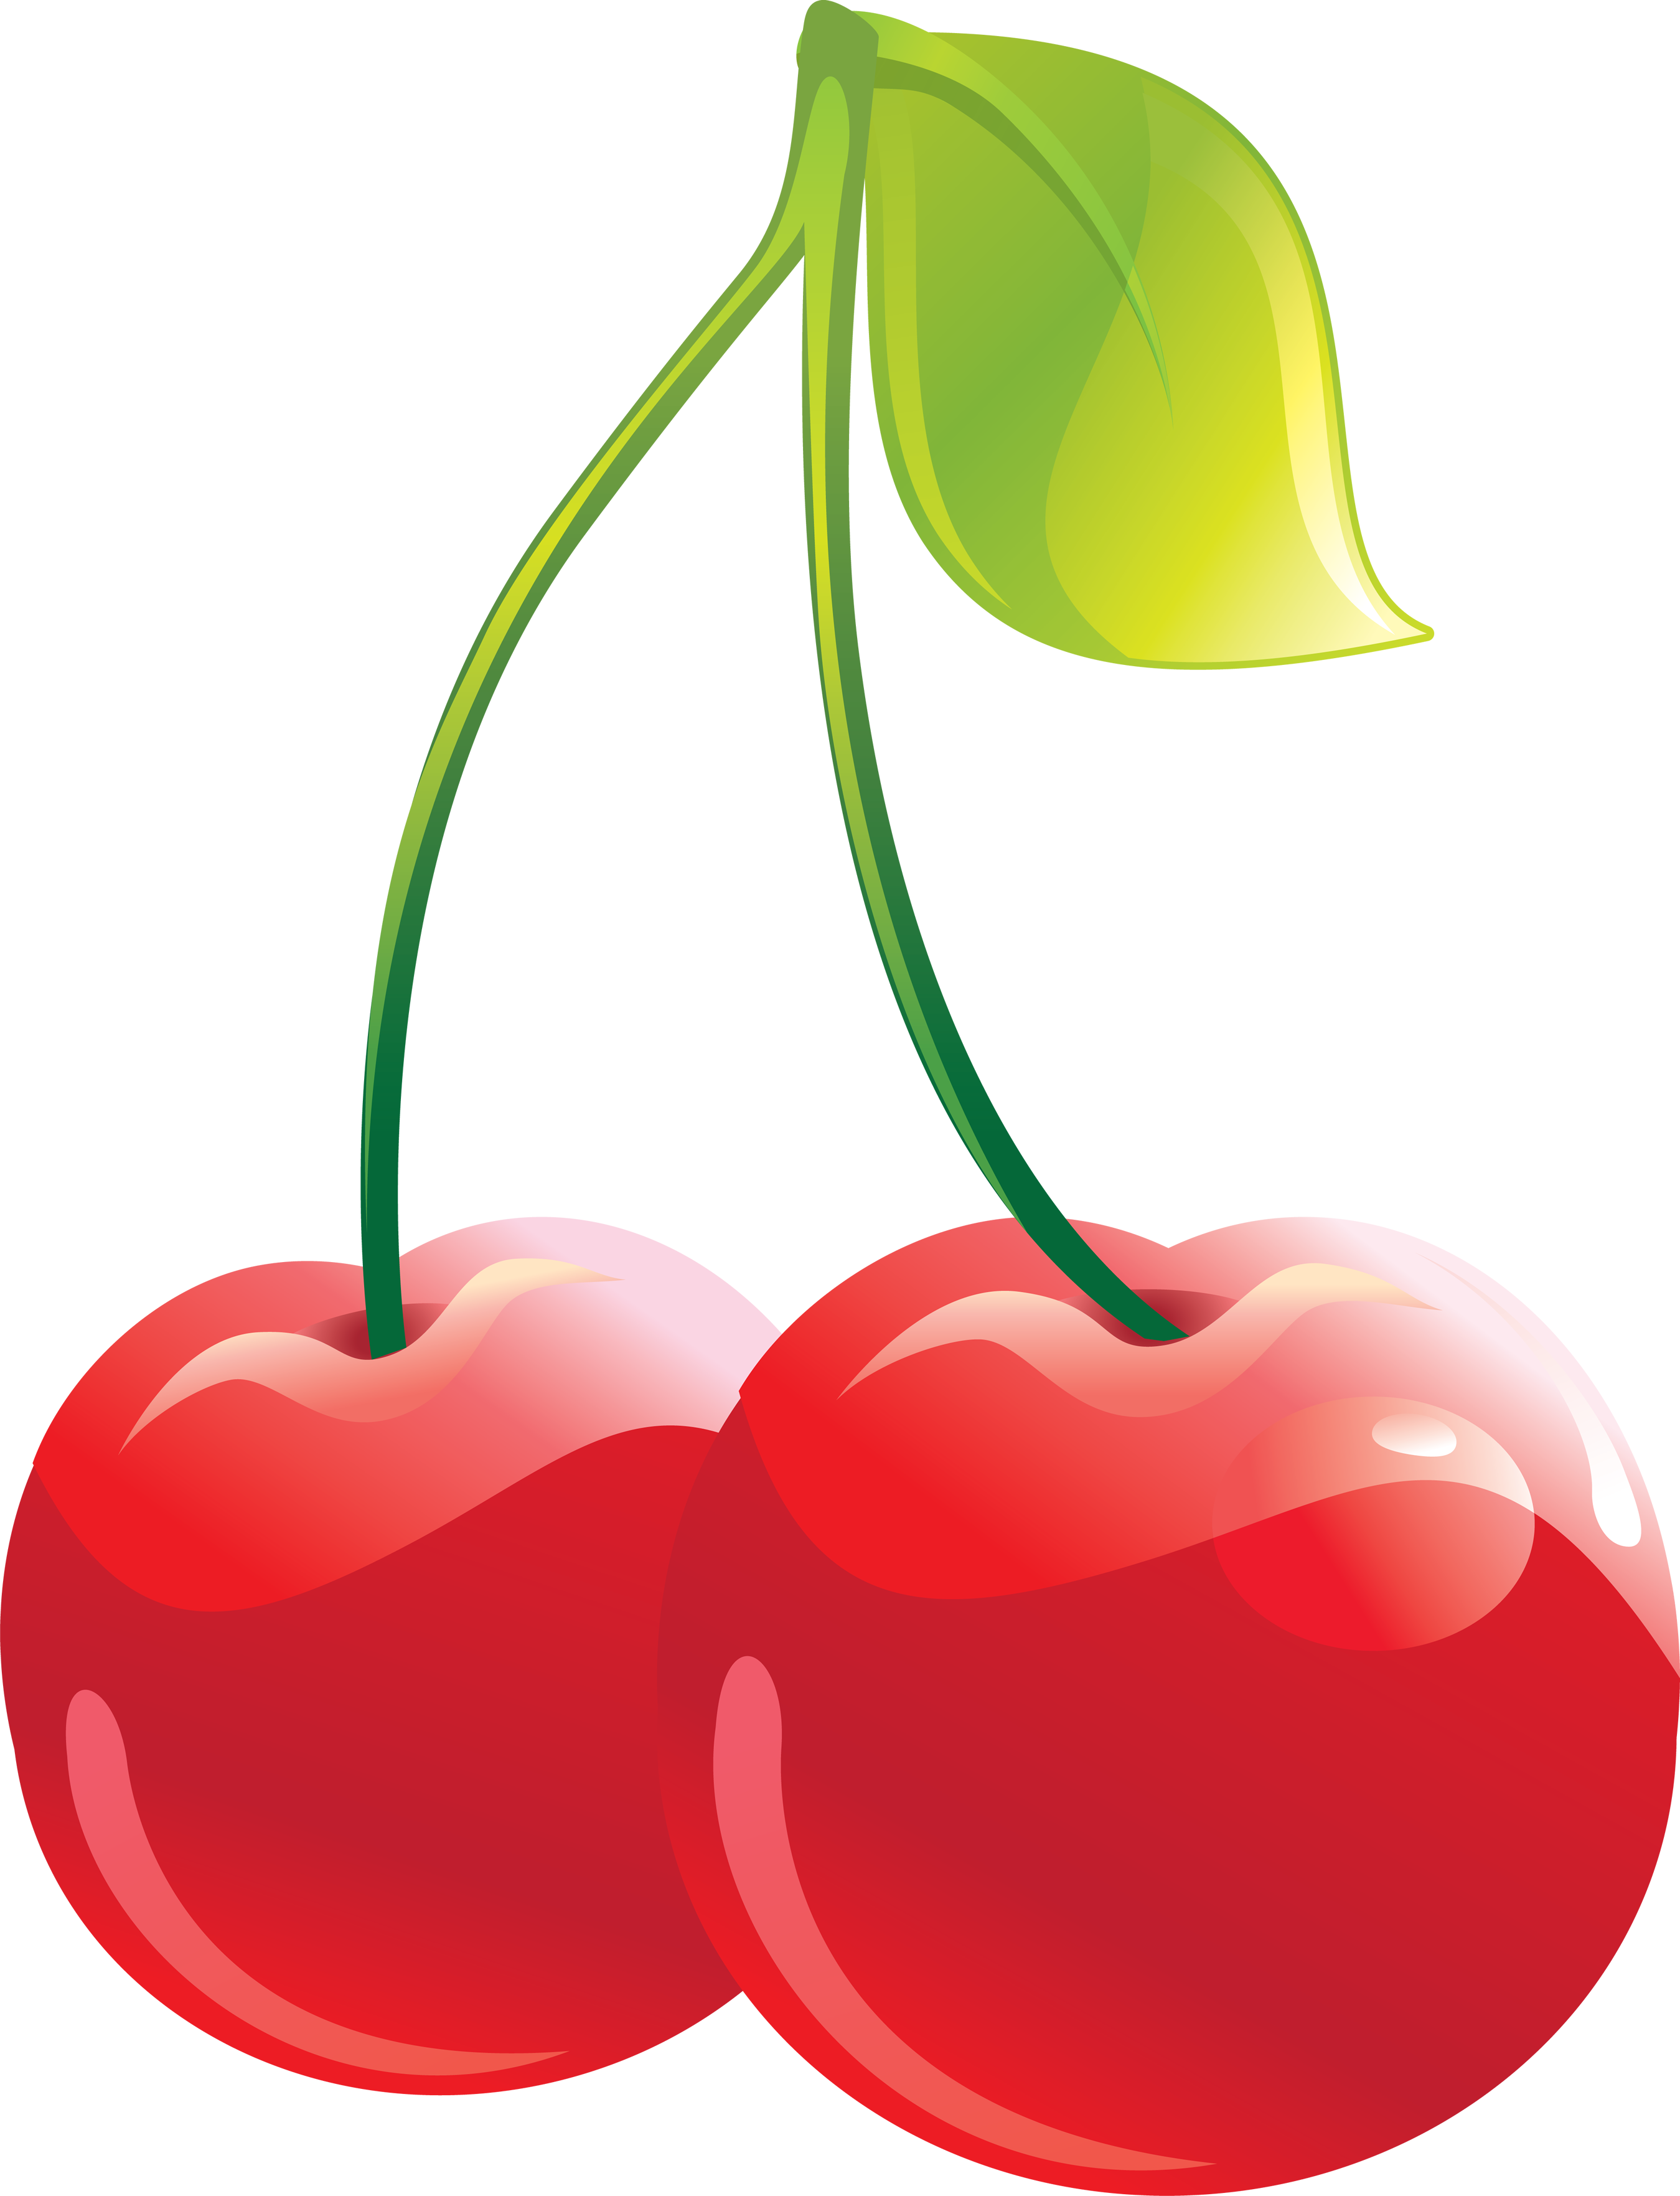 Cherry PNG images, free download.